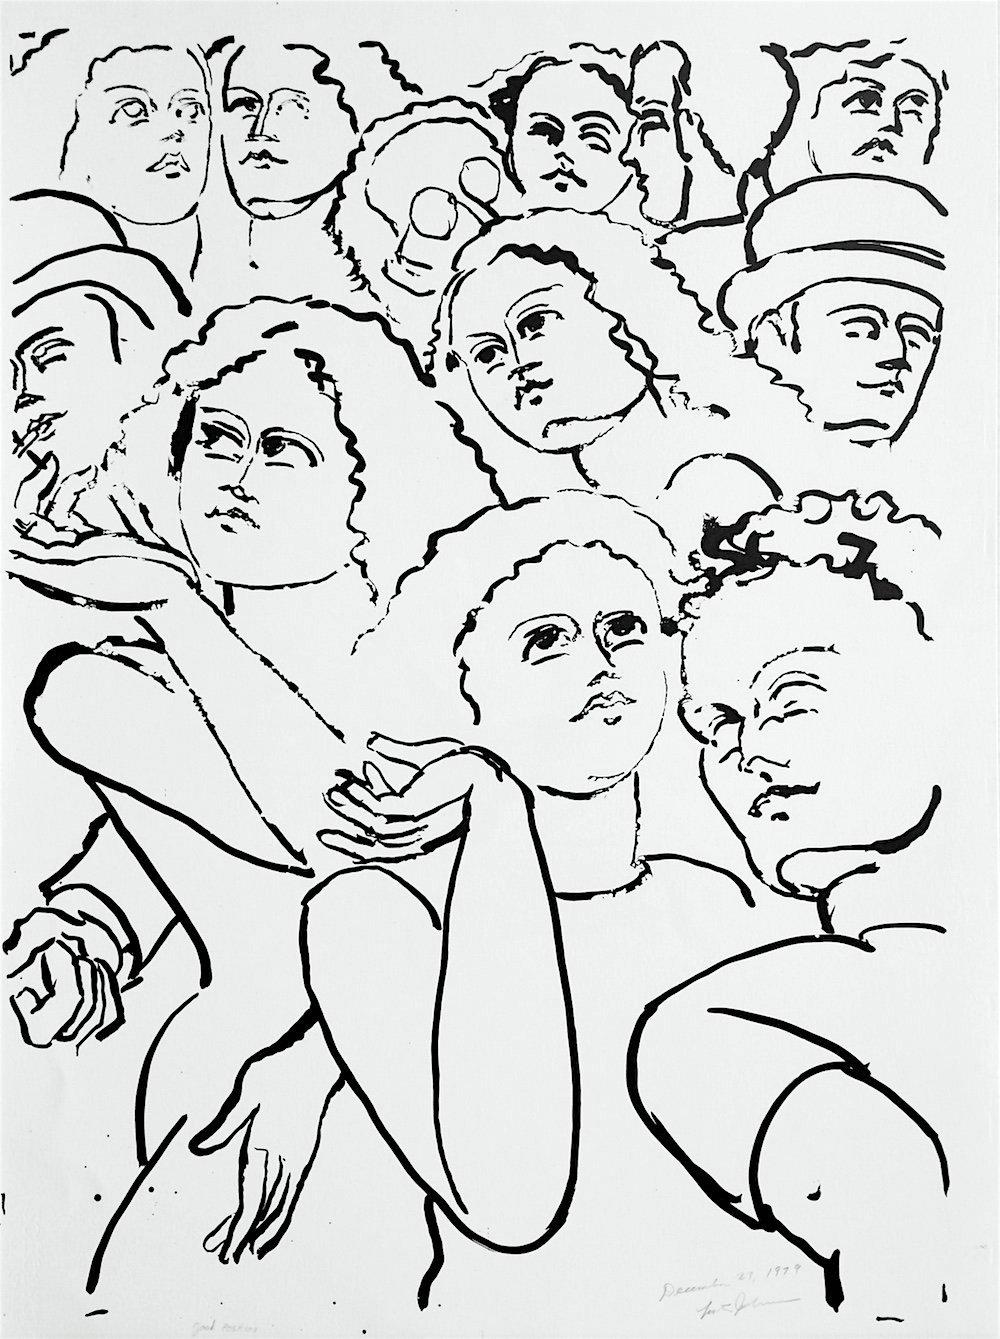 Lester Johnson Portrait Print - NY Street Scene I, Signed Lithograph, Crowd Portrait, Expressionist Line Drawing